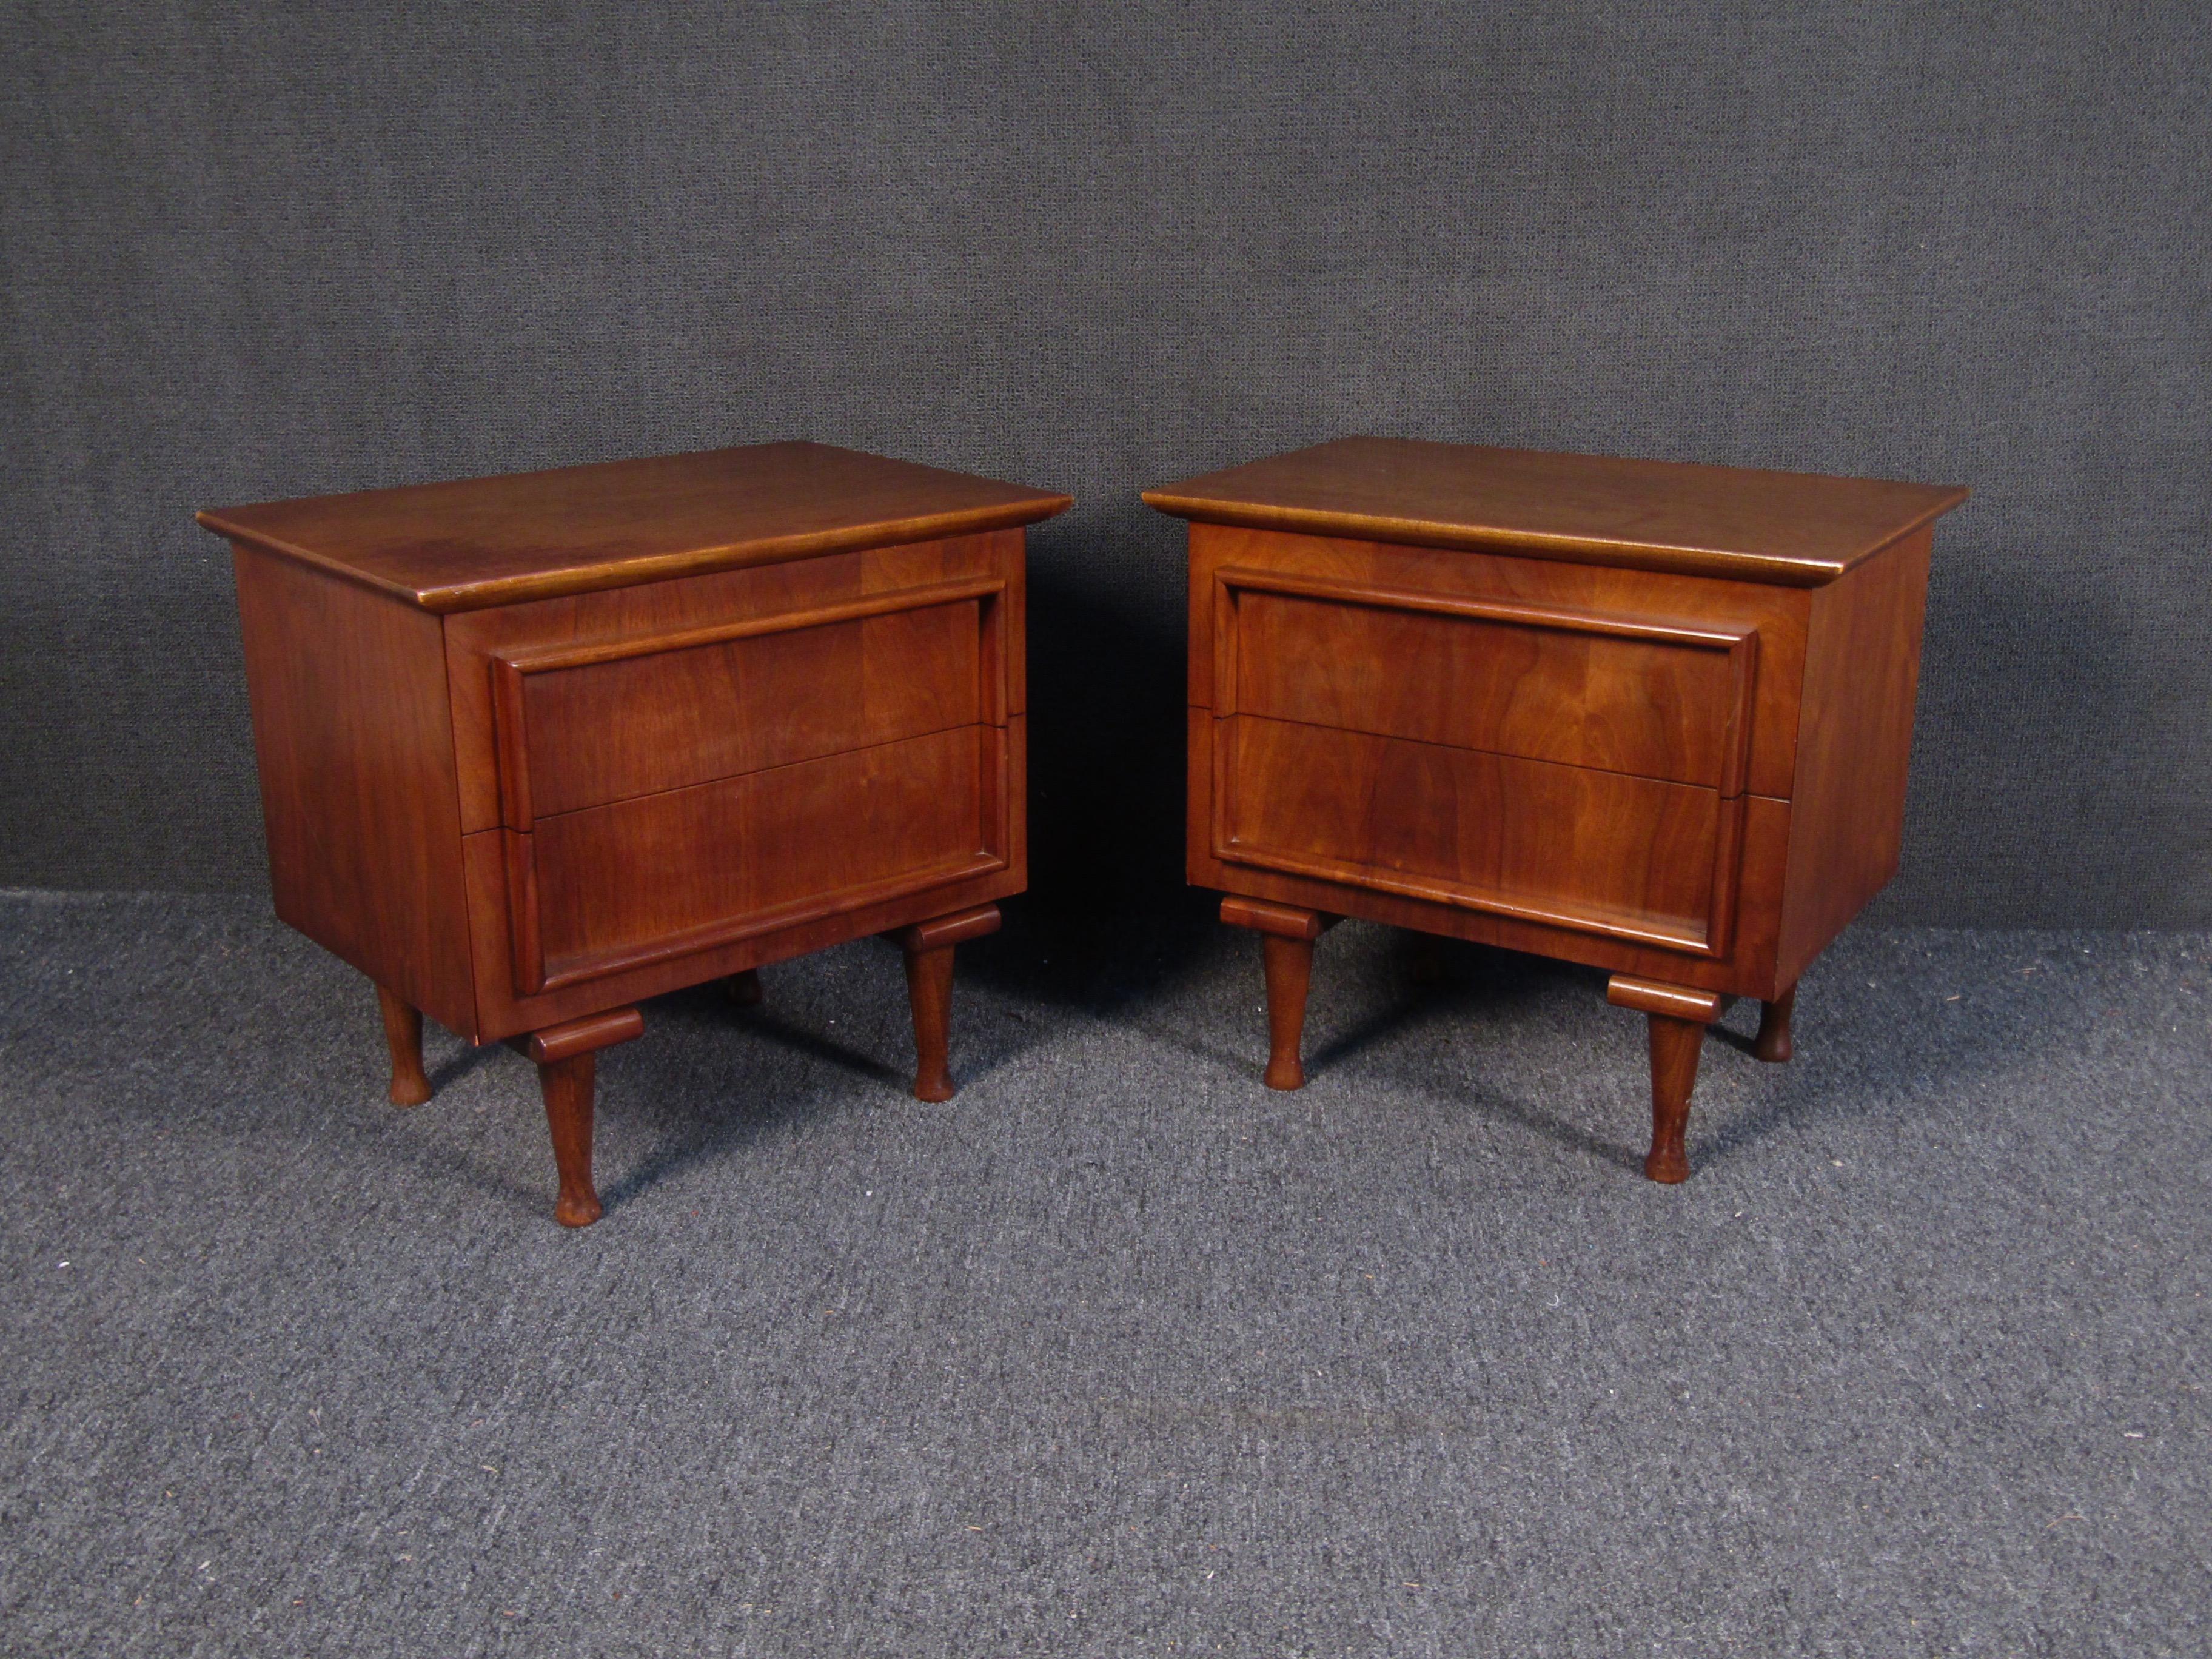 Beautiful pair of vintage modern nightstands. Well-made case pieces with a vintage walnut finish, sculpted legs, and two hefty drawers ensuring ample storage space. This sleek pair of side tables make the perfect addition to any modern interior.